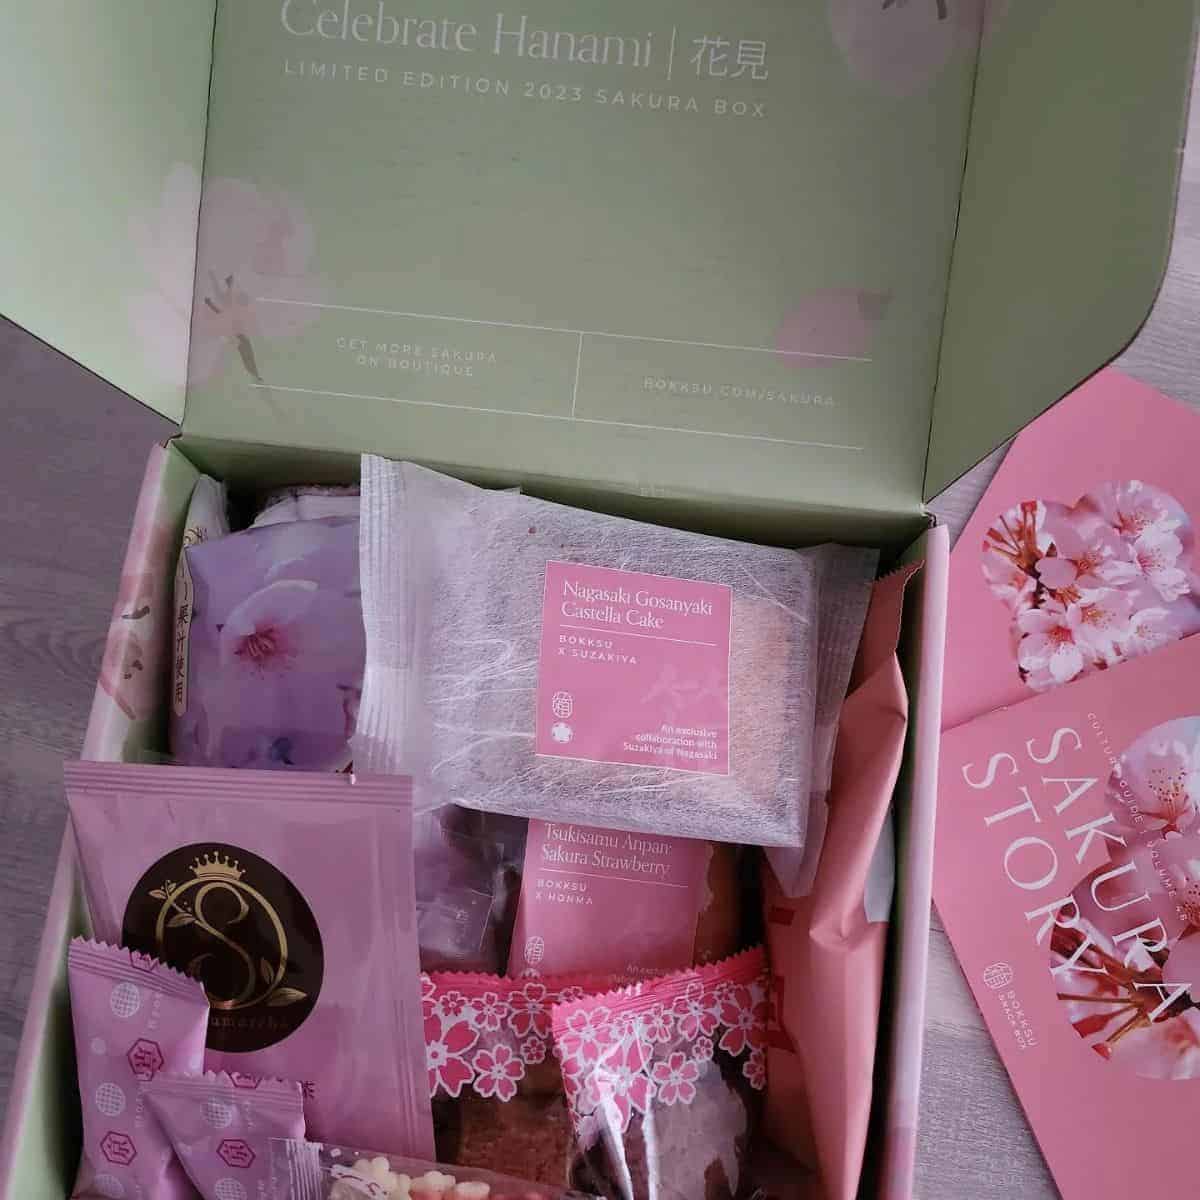 Delicate green and pink coloured Bokksu with purple and pink candies